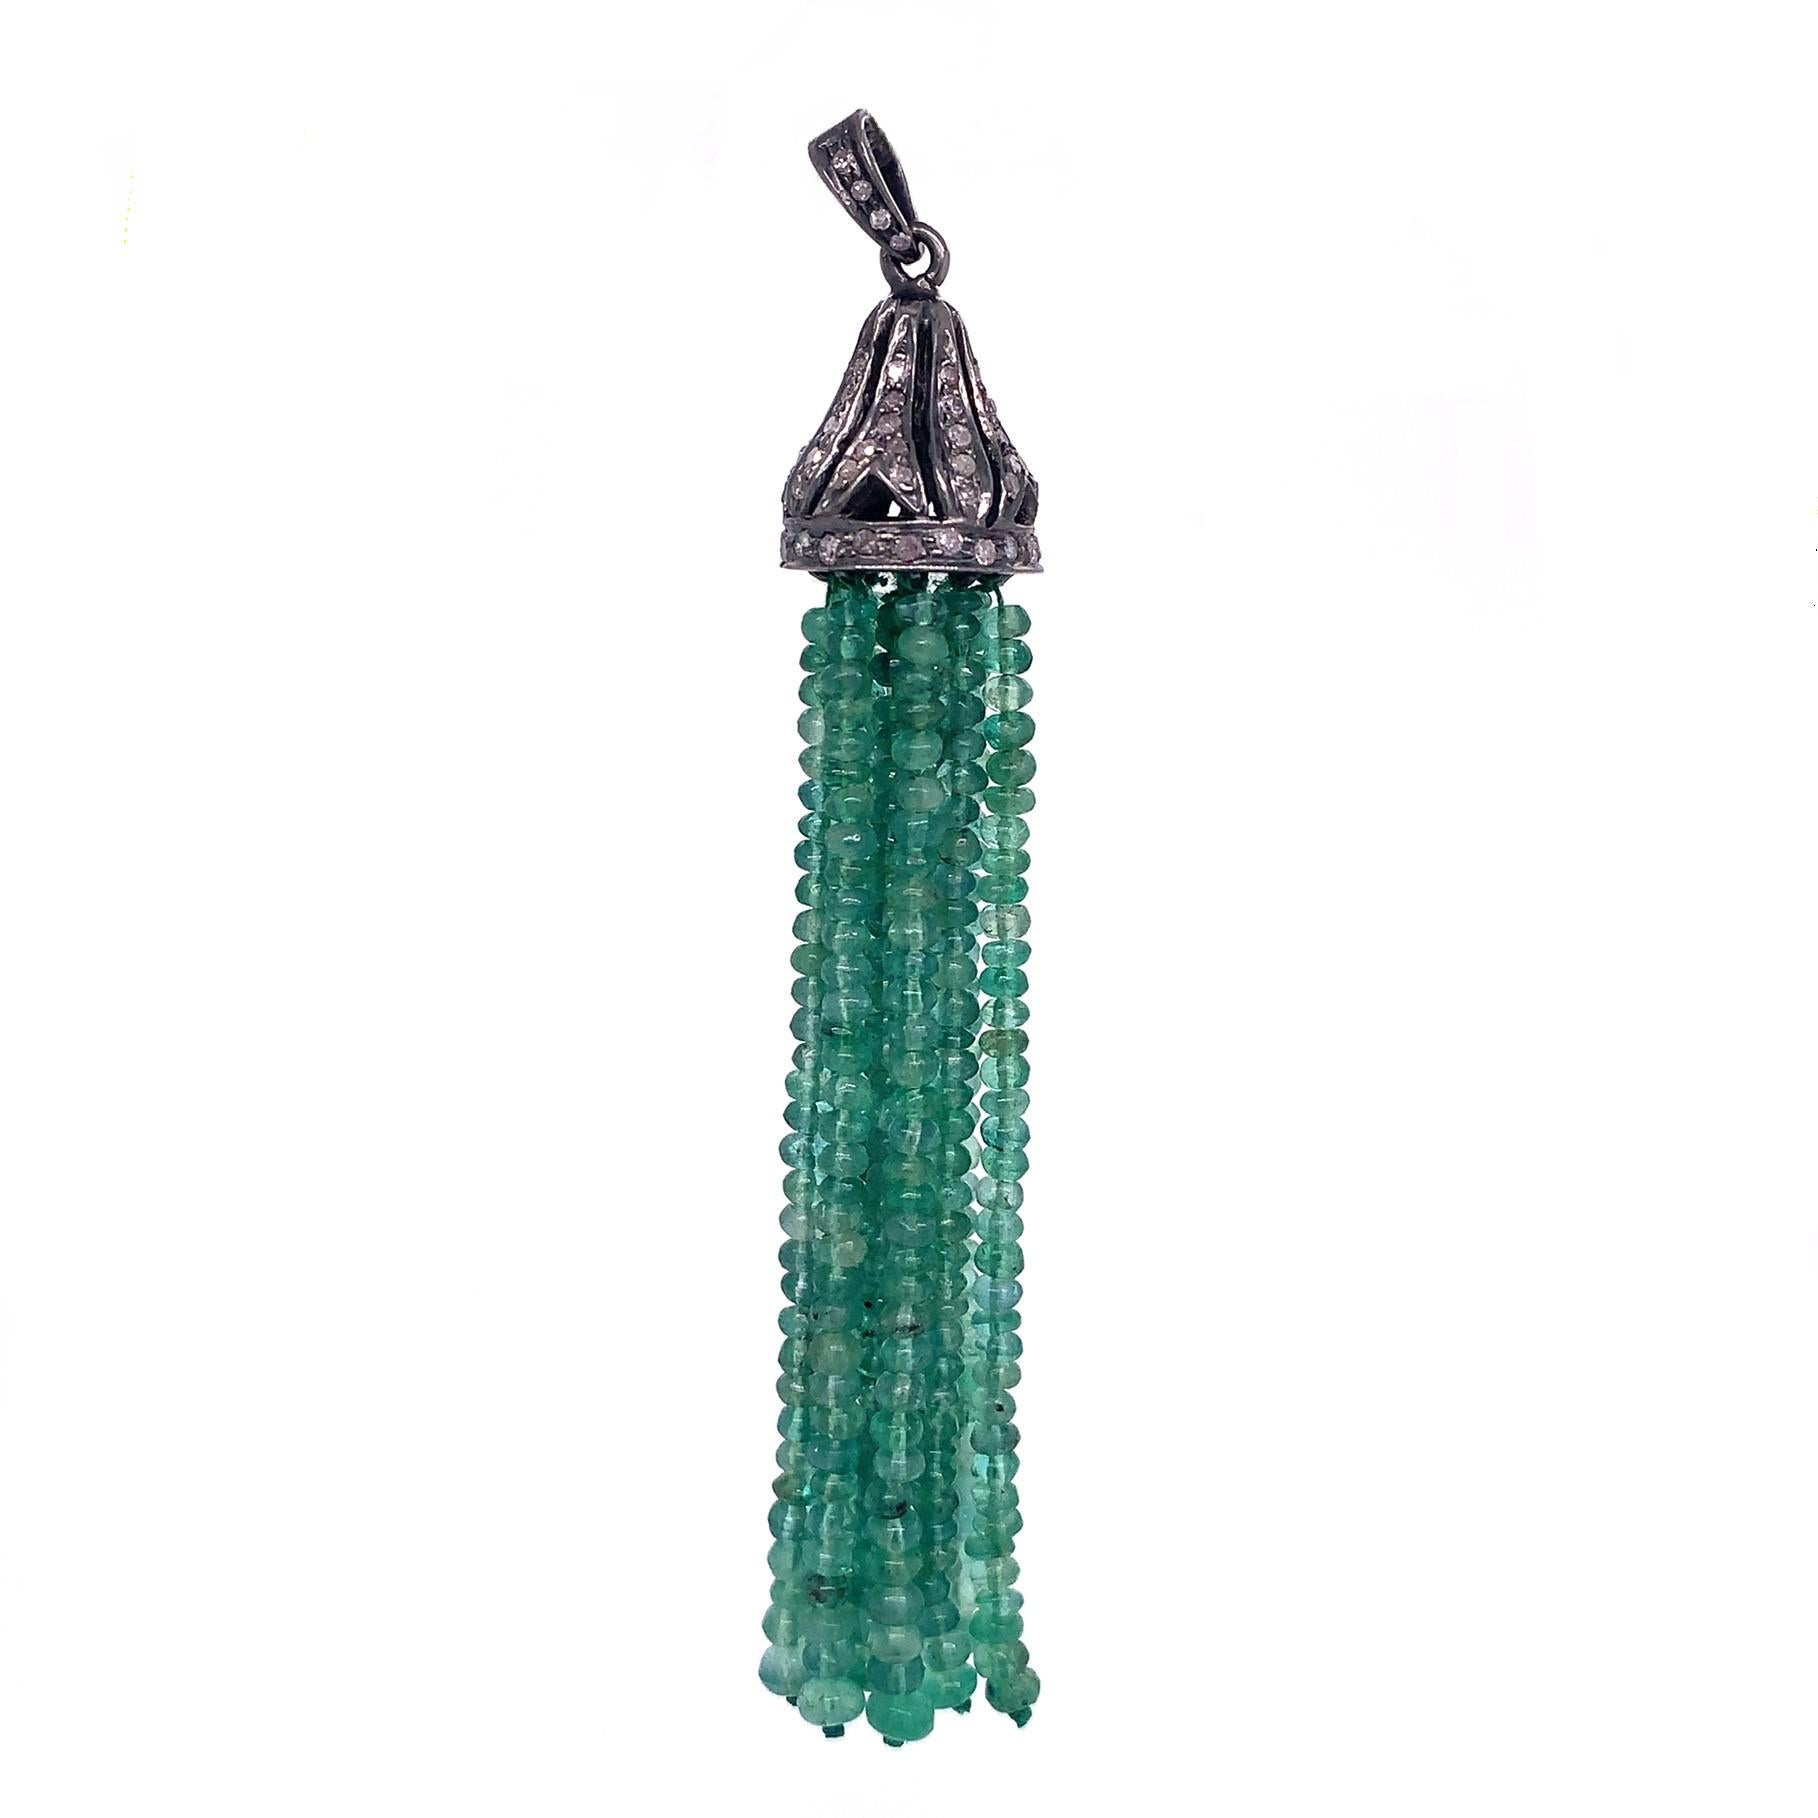 Life in color collection

Rustic diamonds with emerald beads tassel pendant  set in sterling silver.

Emerald: 34.21ct total weight.
Diamond: 0.46ct total weight.
